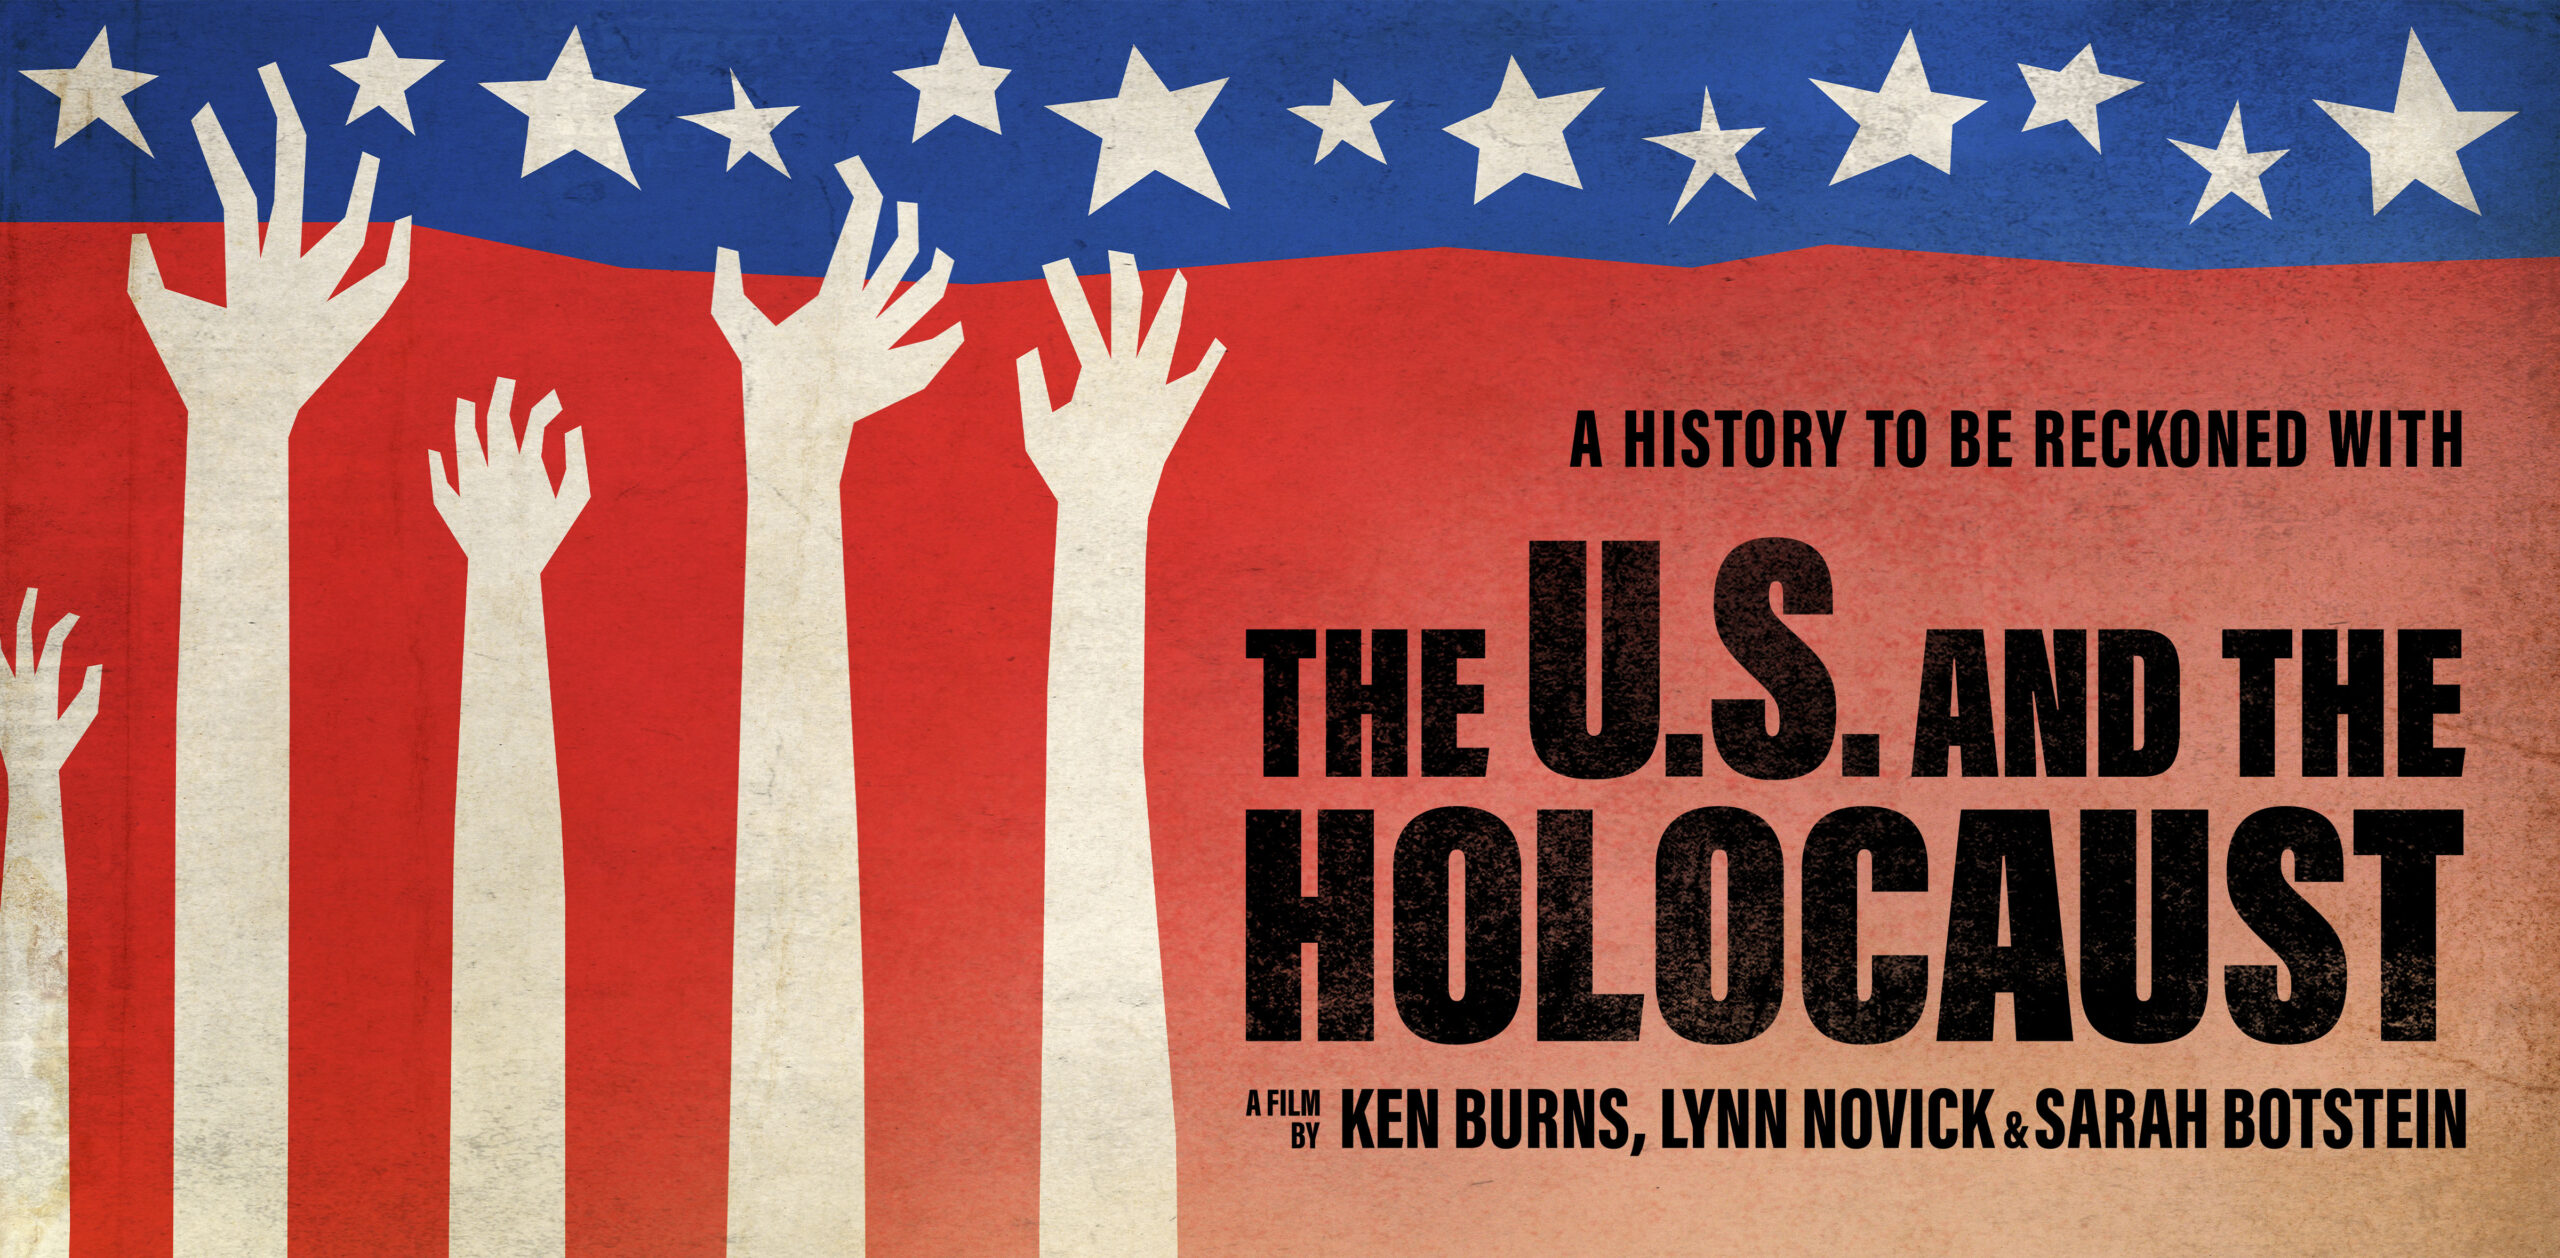 Why, Despite Good Intentions, Ken Burns’s "The U.S. and the Holocaust" Fails